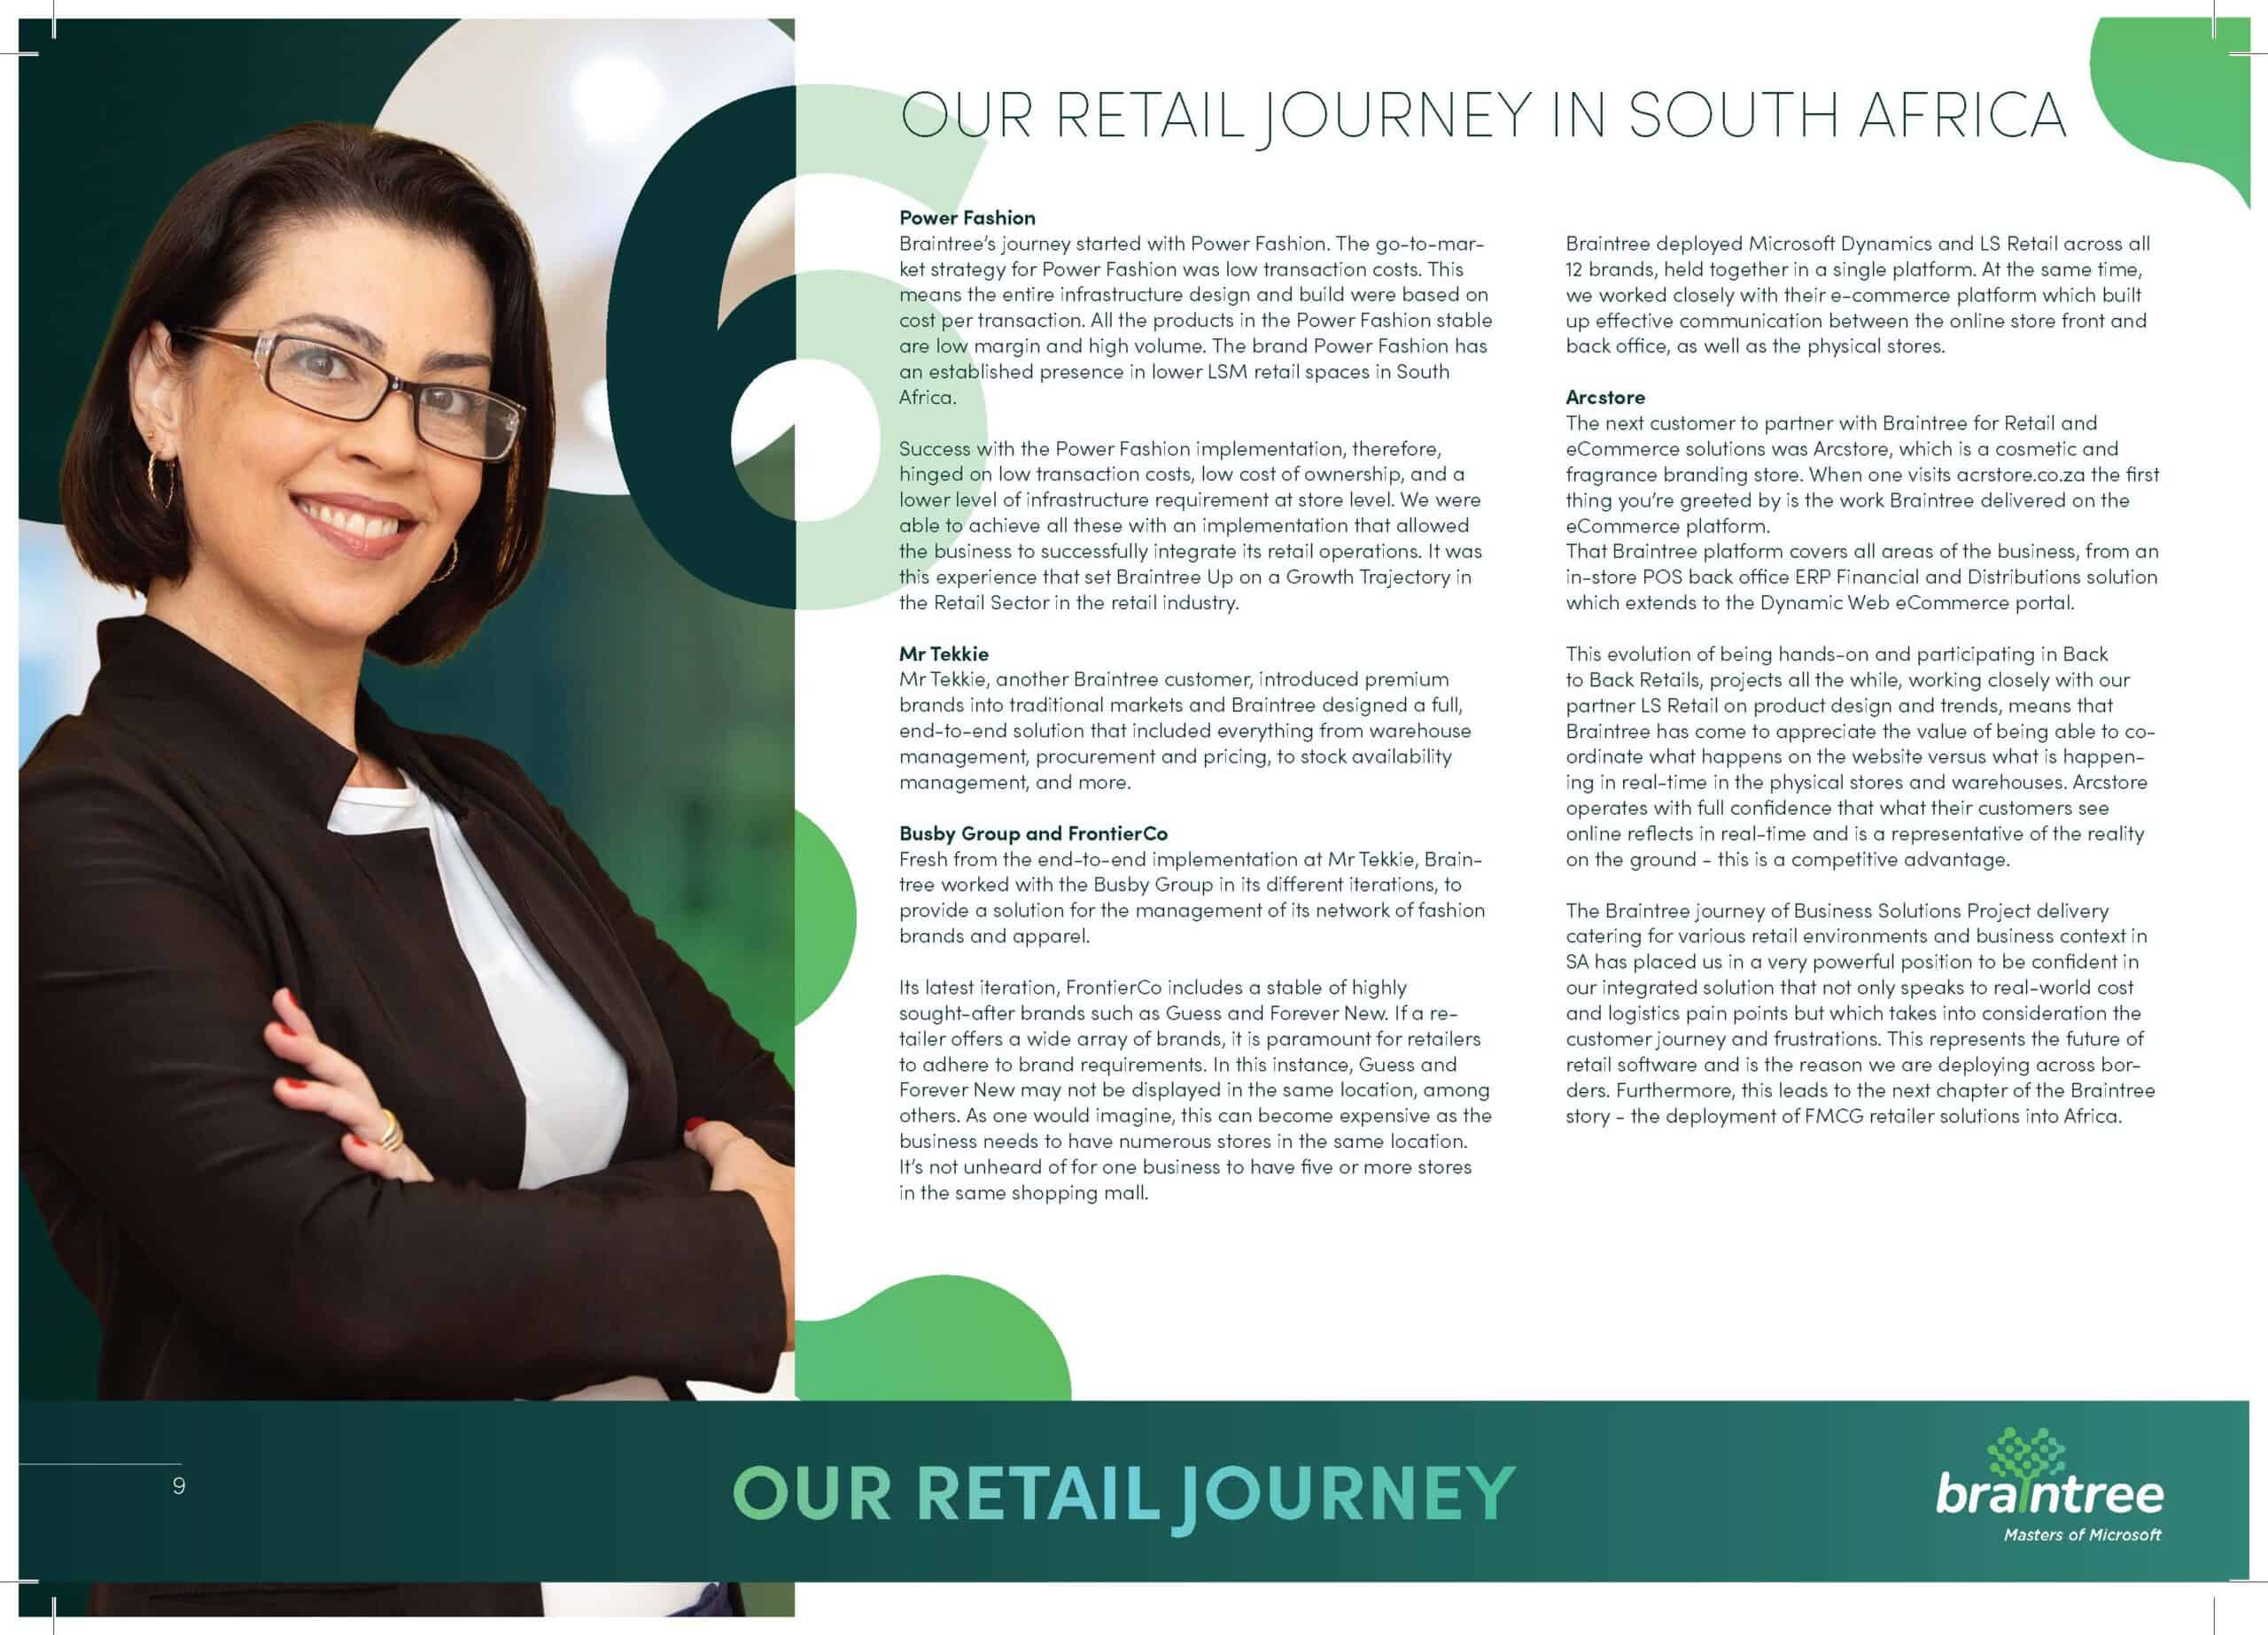 Braintree branding of Retail whitepaper FA Page 09 scaled